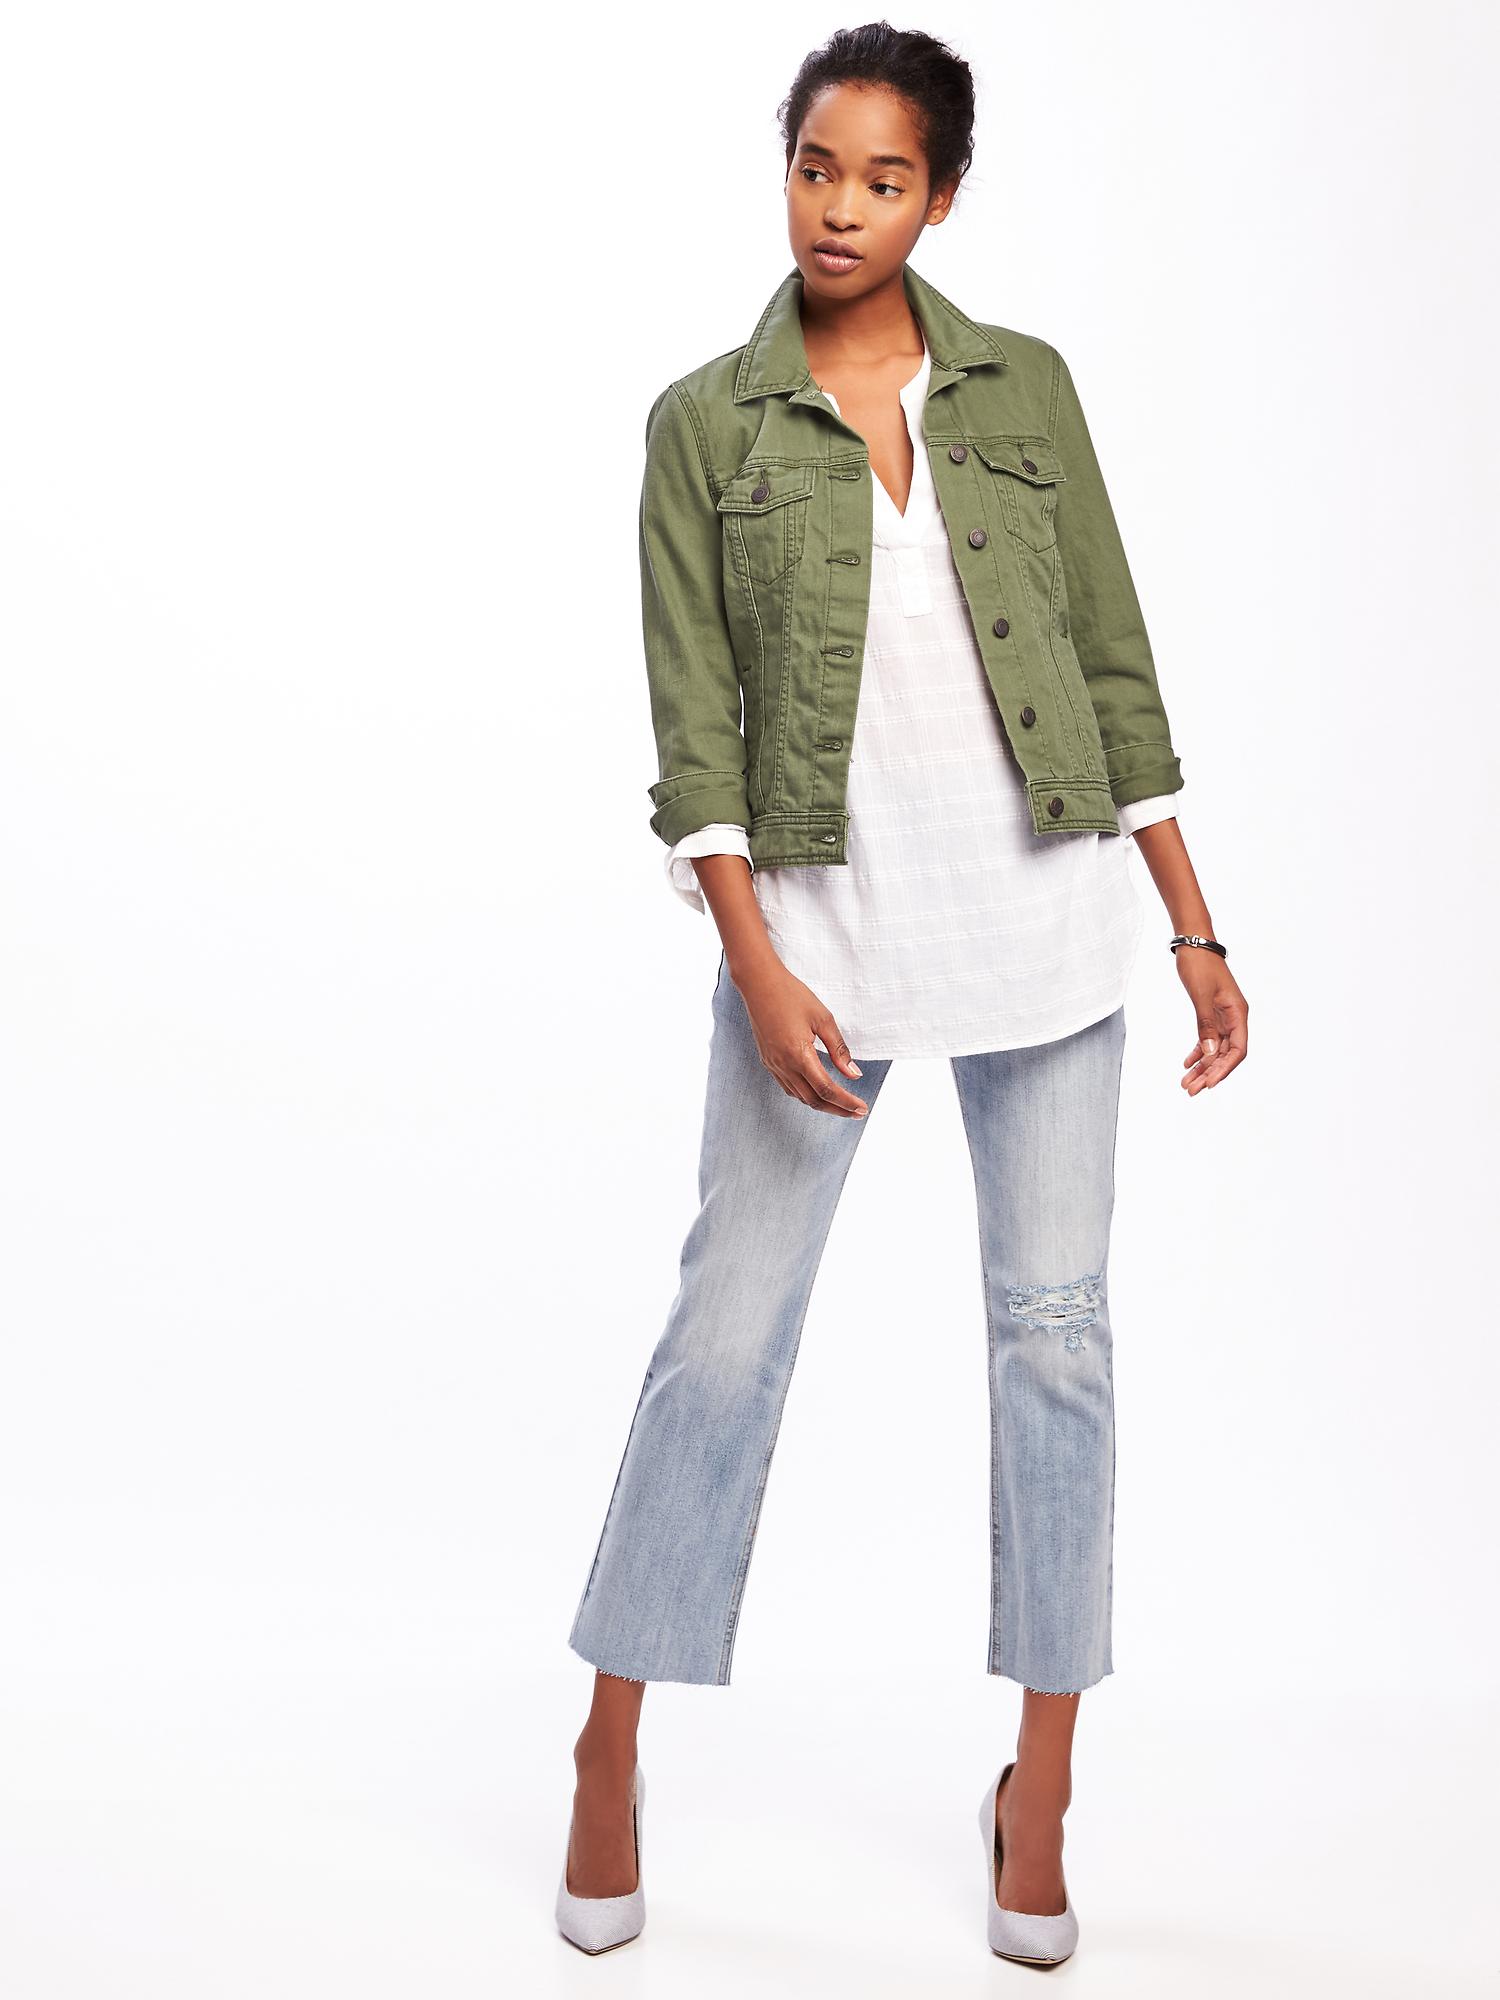 Buy KANZUL -FASHION PASSION Full Sleeve Solid Olive Green Denim Jacket for  Women & Girls at Amazon.in